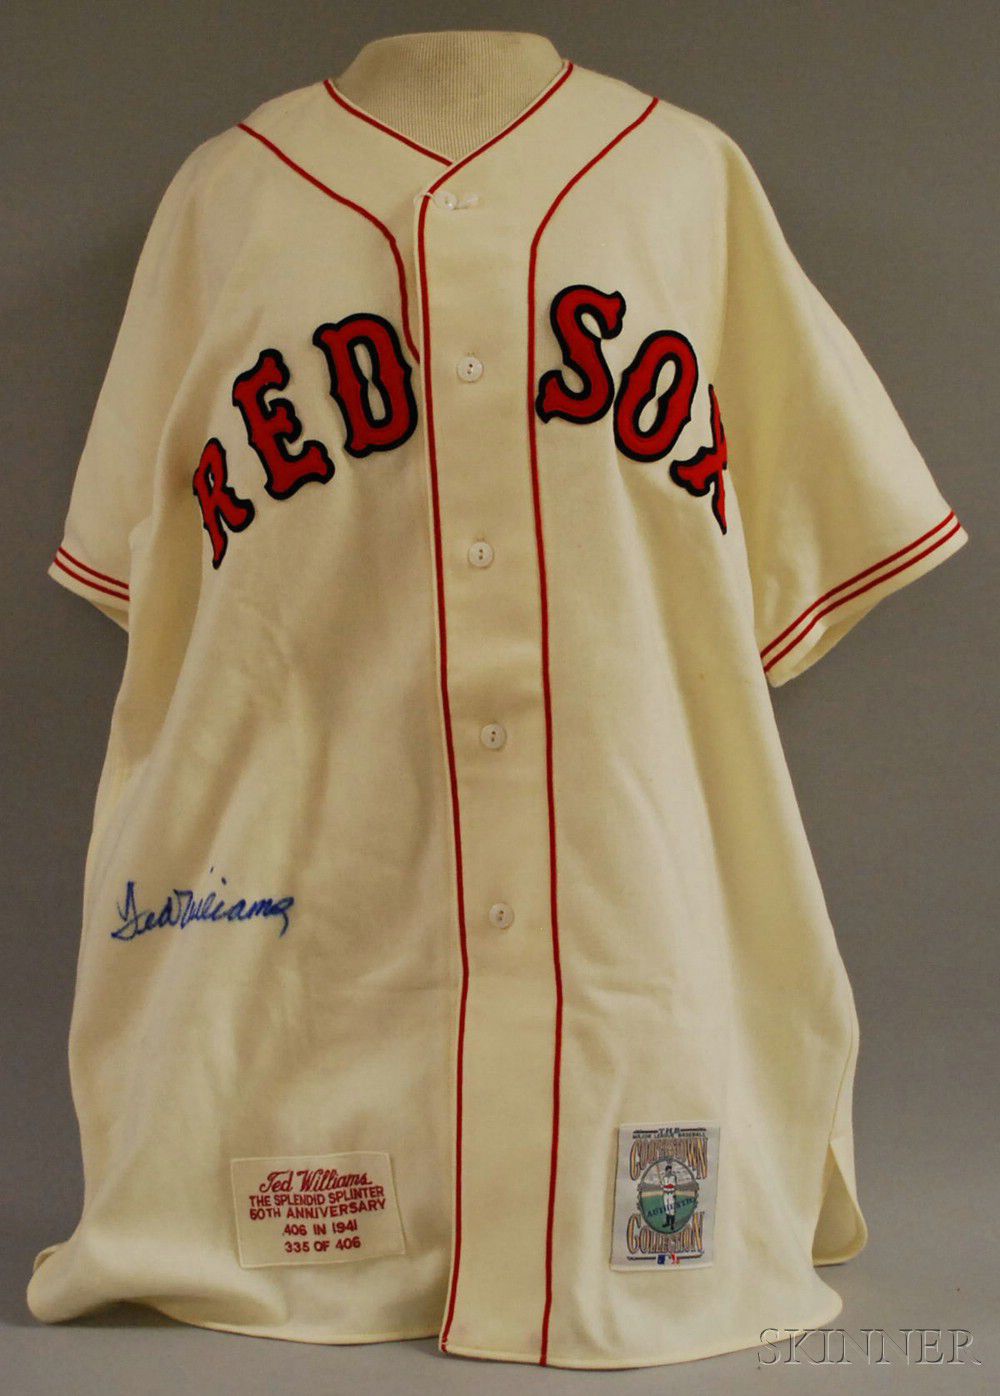 Sold at auction Ted Williams Autographed Mitchell & Ness Cooperstown  Collection Boston Red Sox #9 Home Jersey Auction Number 2521M Lot Number  142